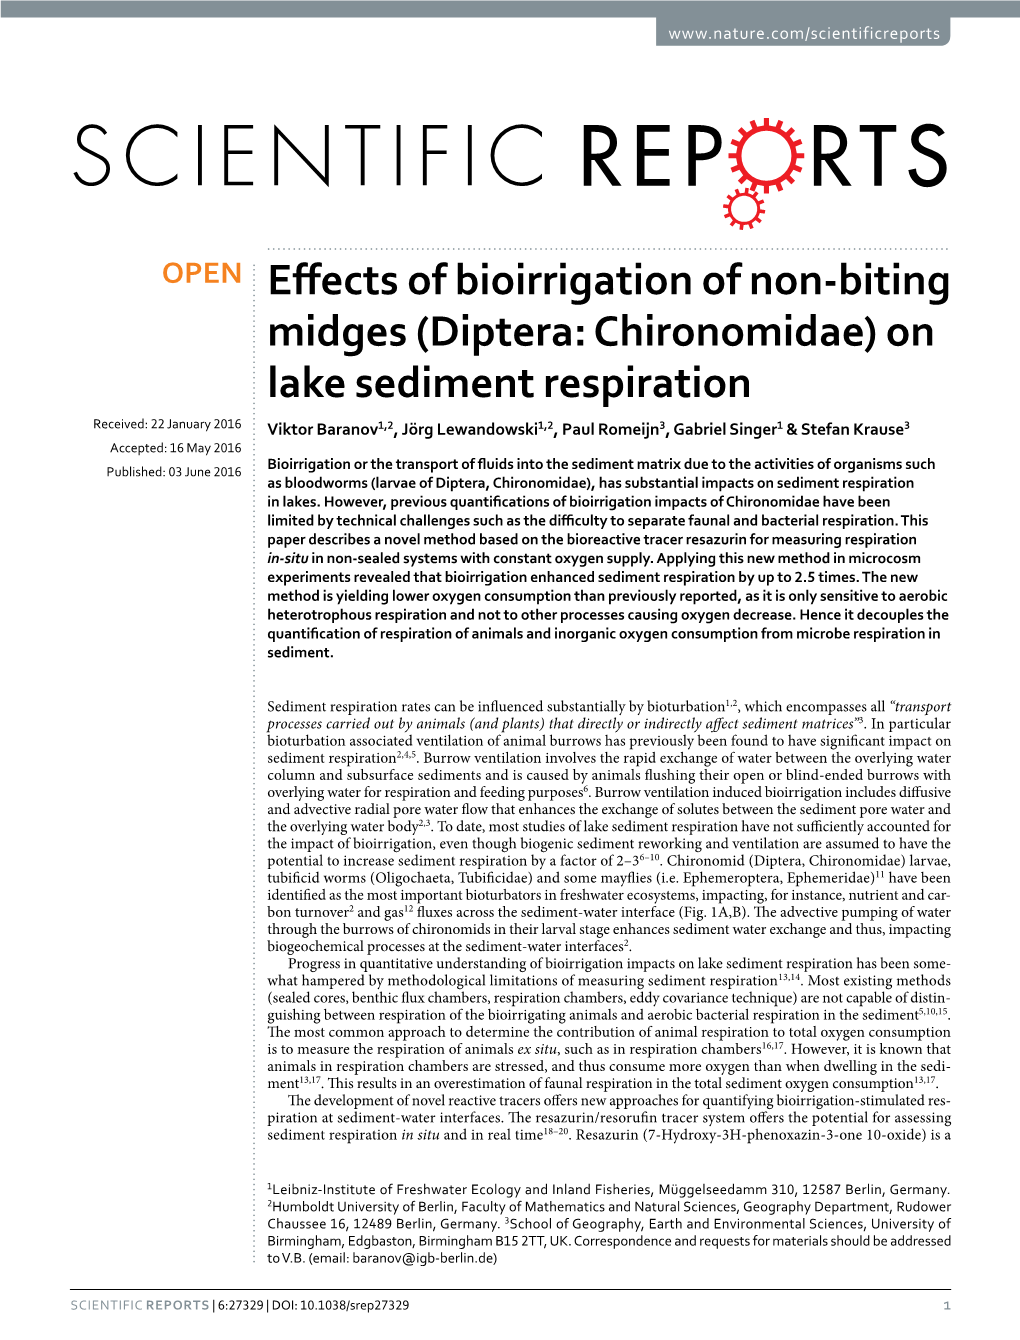 Effects of Bioirrigation of Non-Biting Midges (Diptera